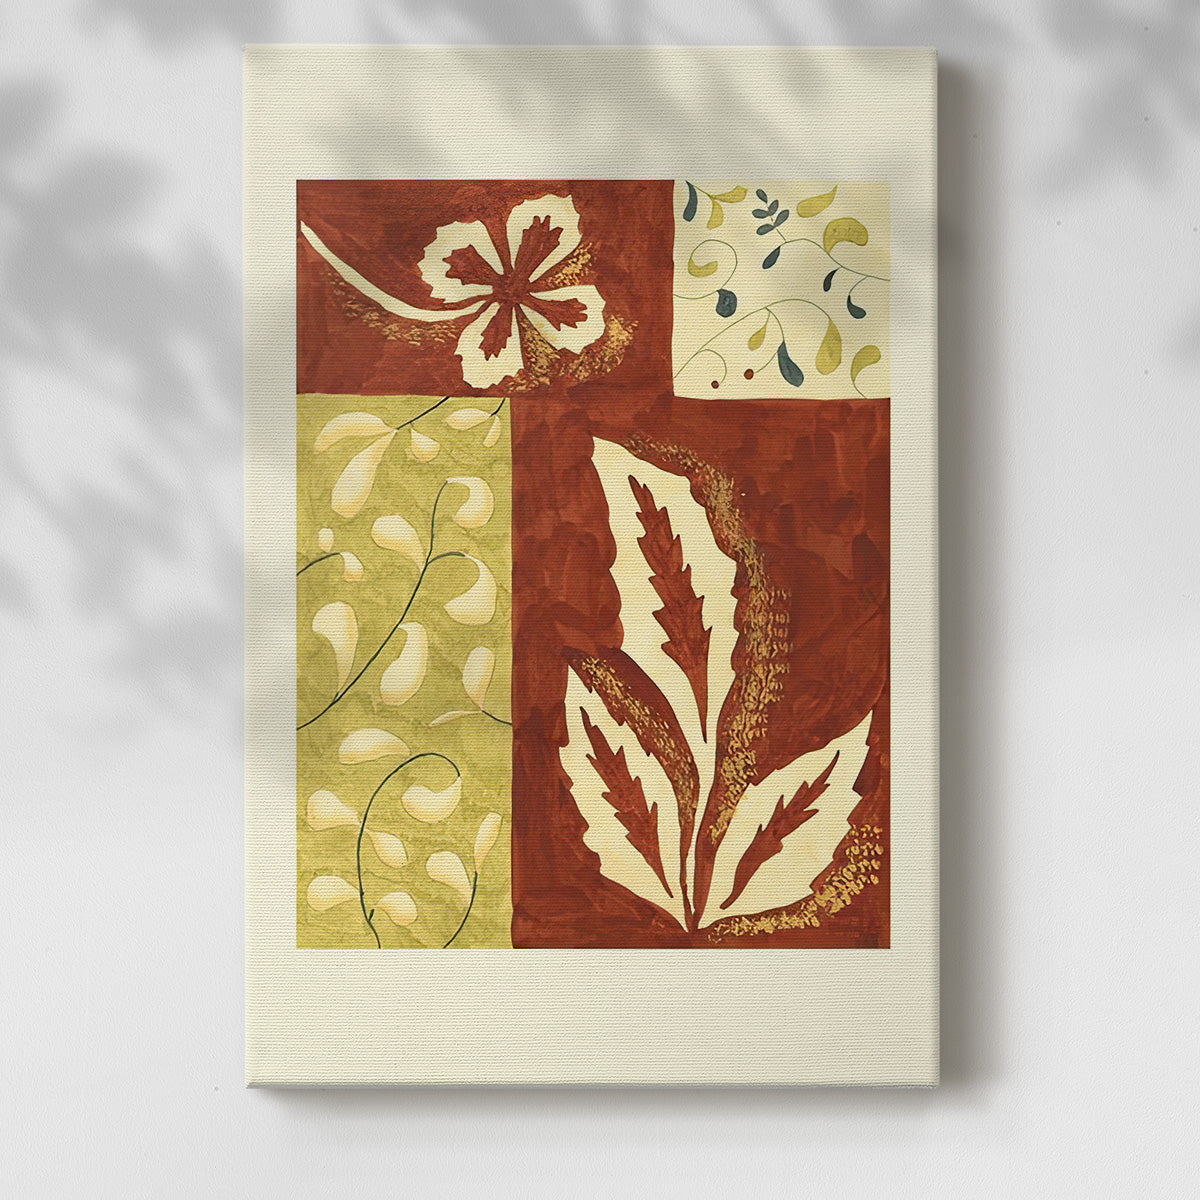 Festive Floral I - Gallery Wrapped Canvas